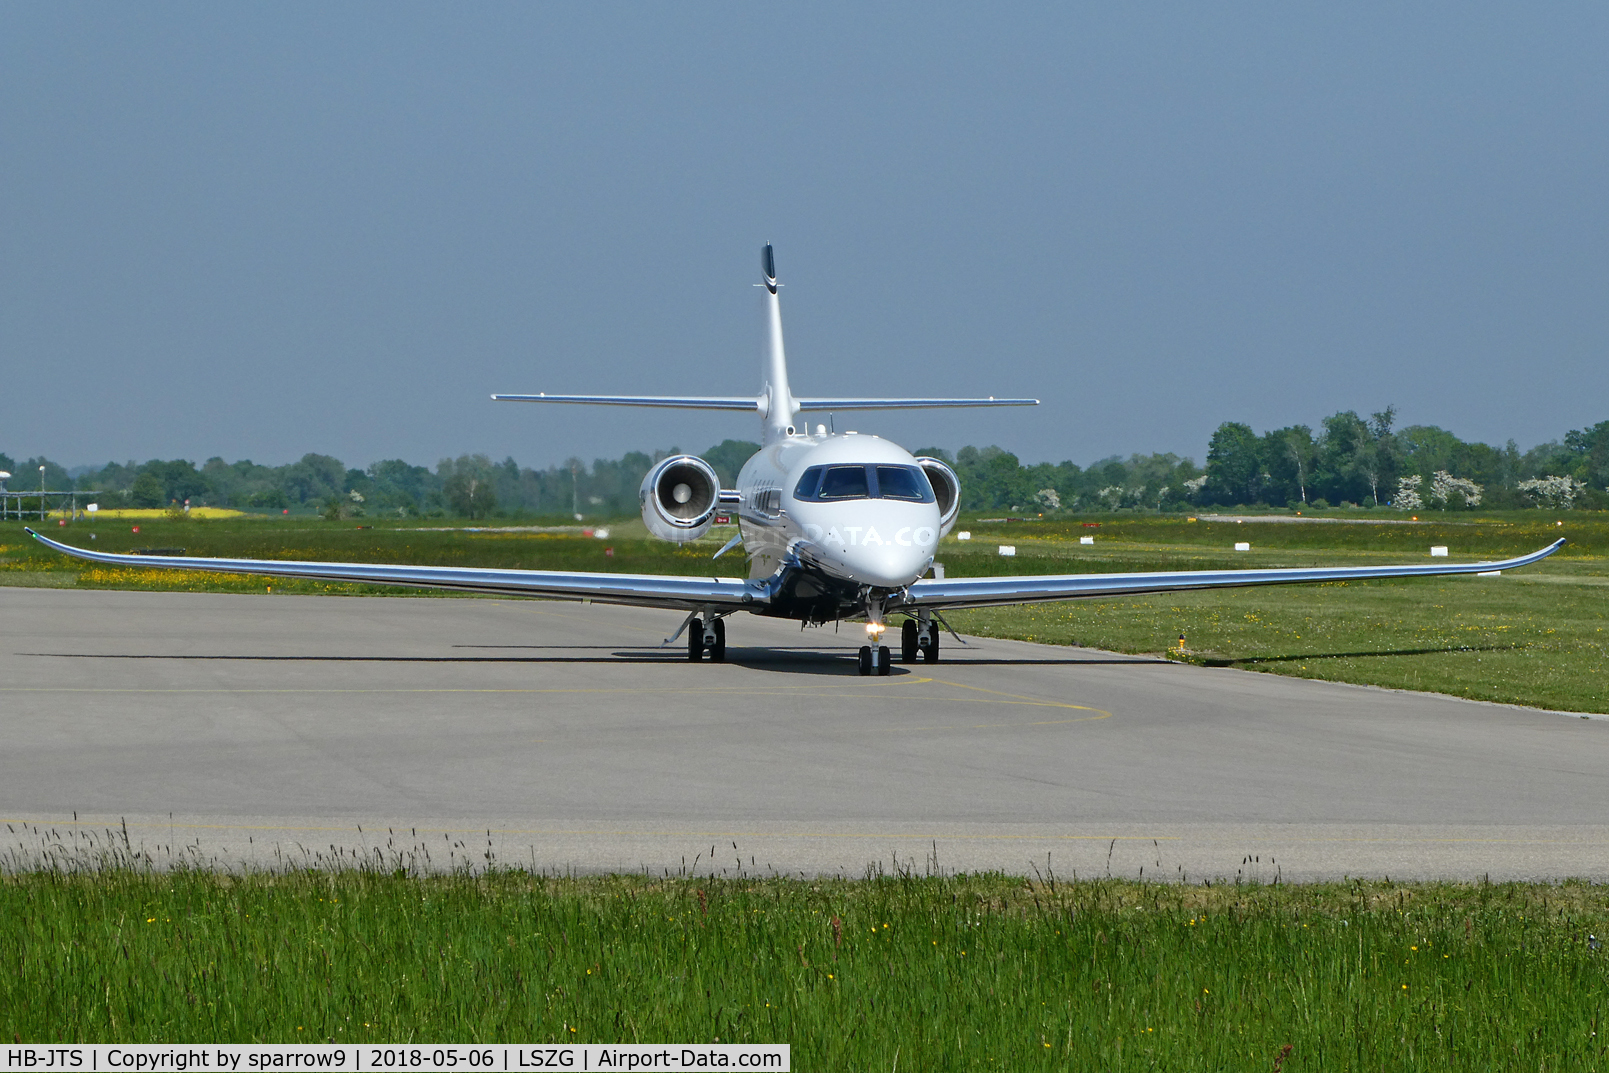 HB-JTS, 2017 Cessna 680A Citation Latitude C/N 680A-0070, At Grenchen. HB-registered from 2017-09-28 until 2018-06-04